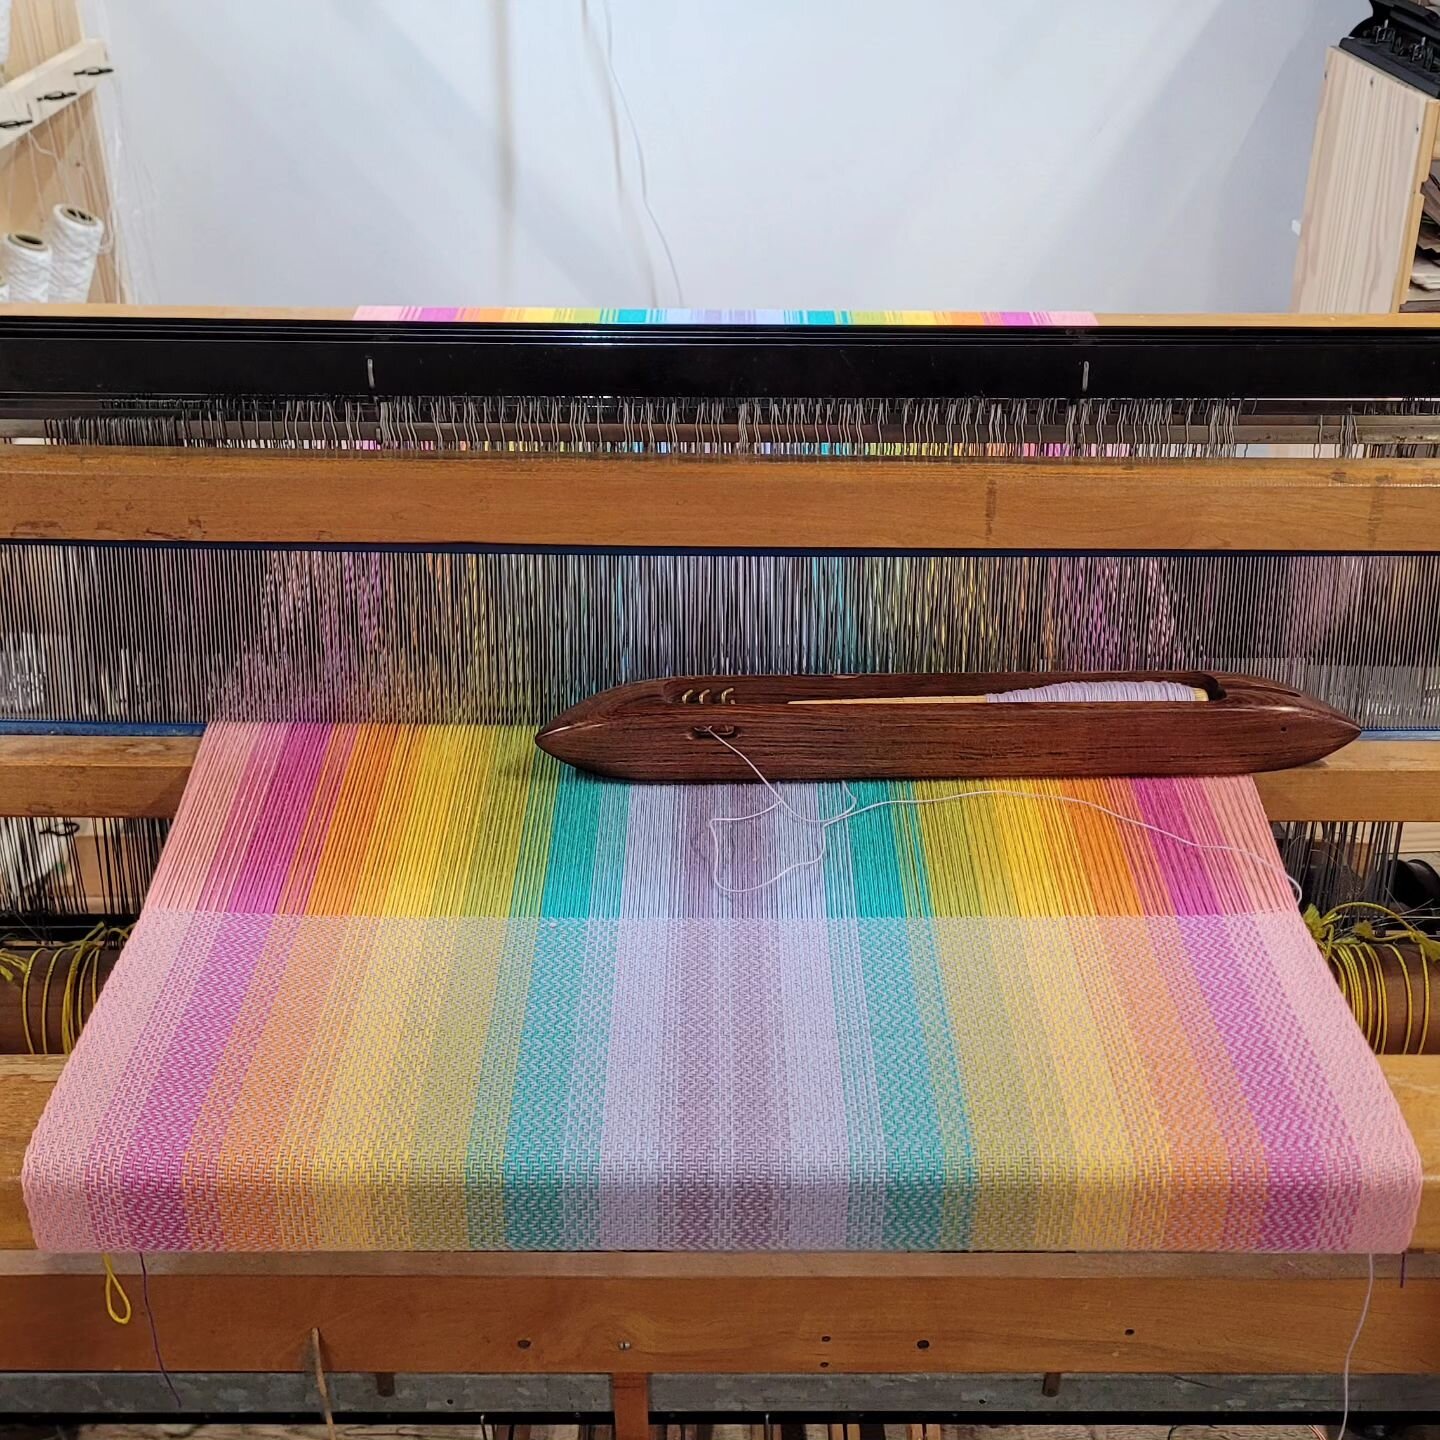 Lavender weft on this Citrus Rainbow warp is perfection. Happy First Day of Spring everyone!